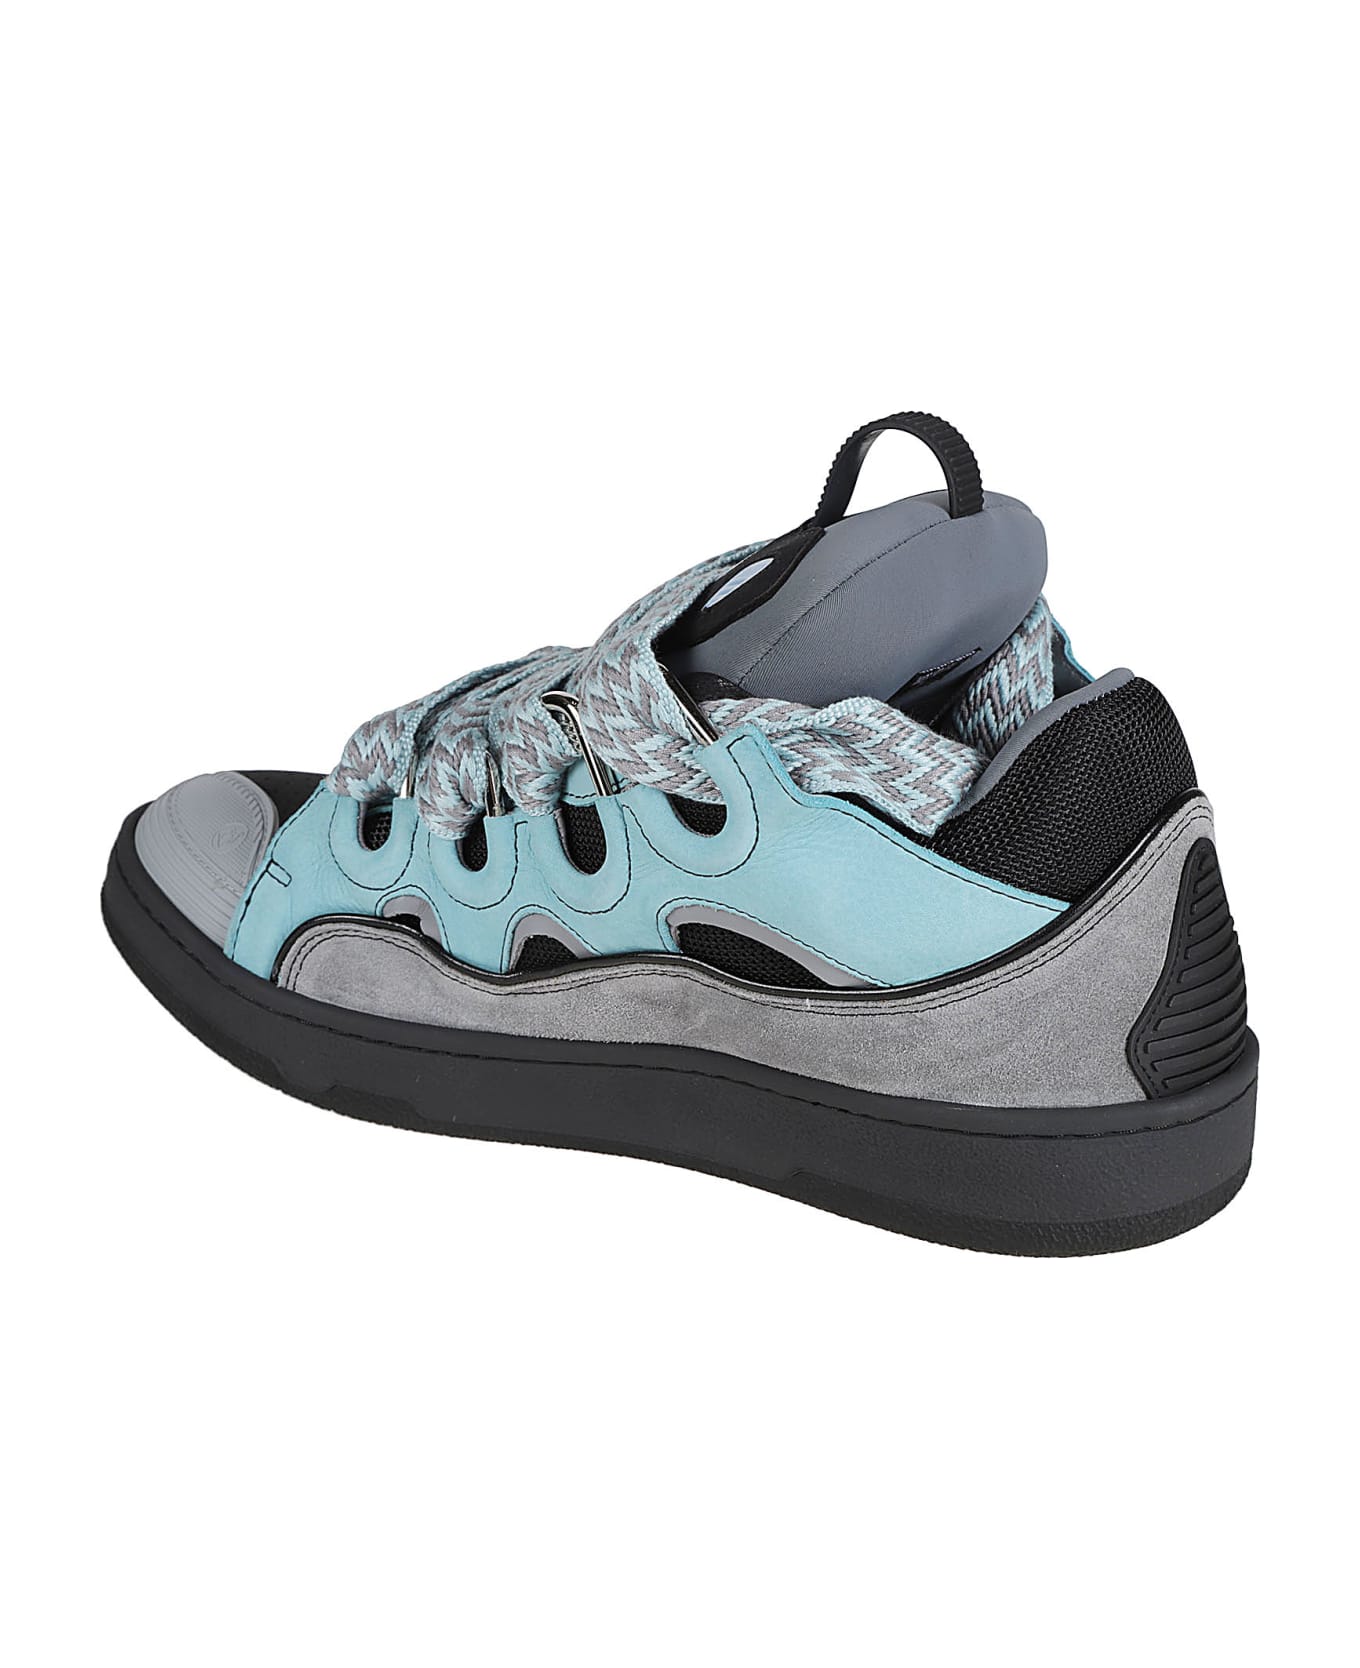 Lanvin Curb Sneakers - Light Blue/Anthracite